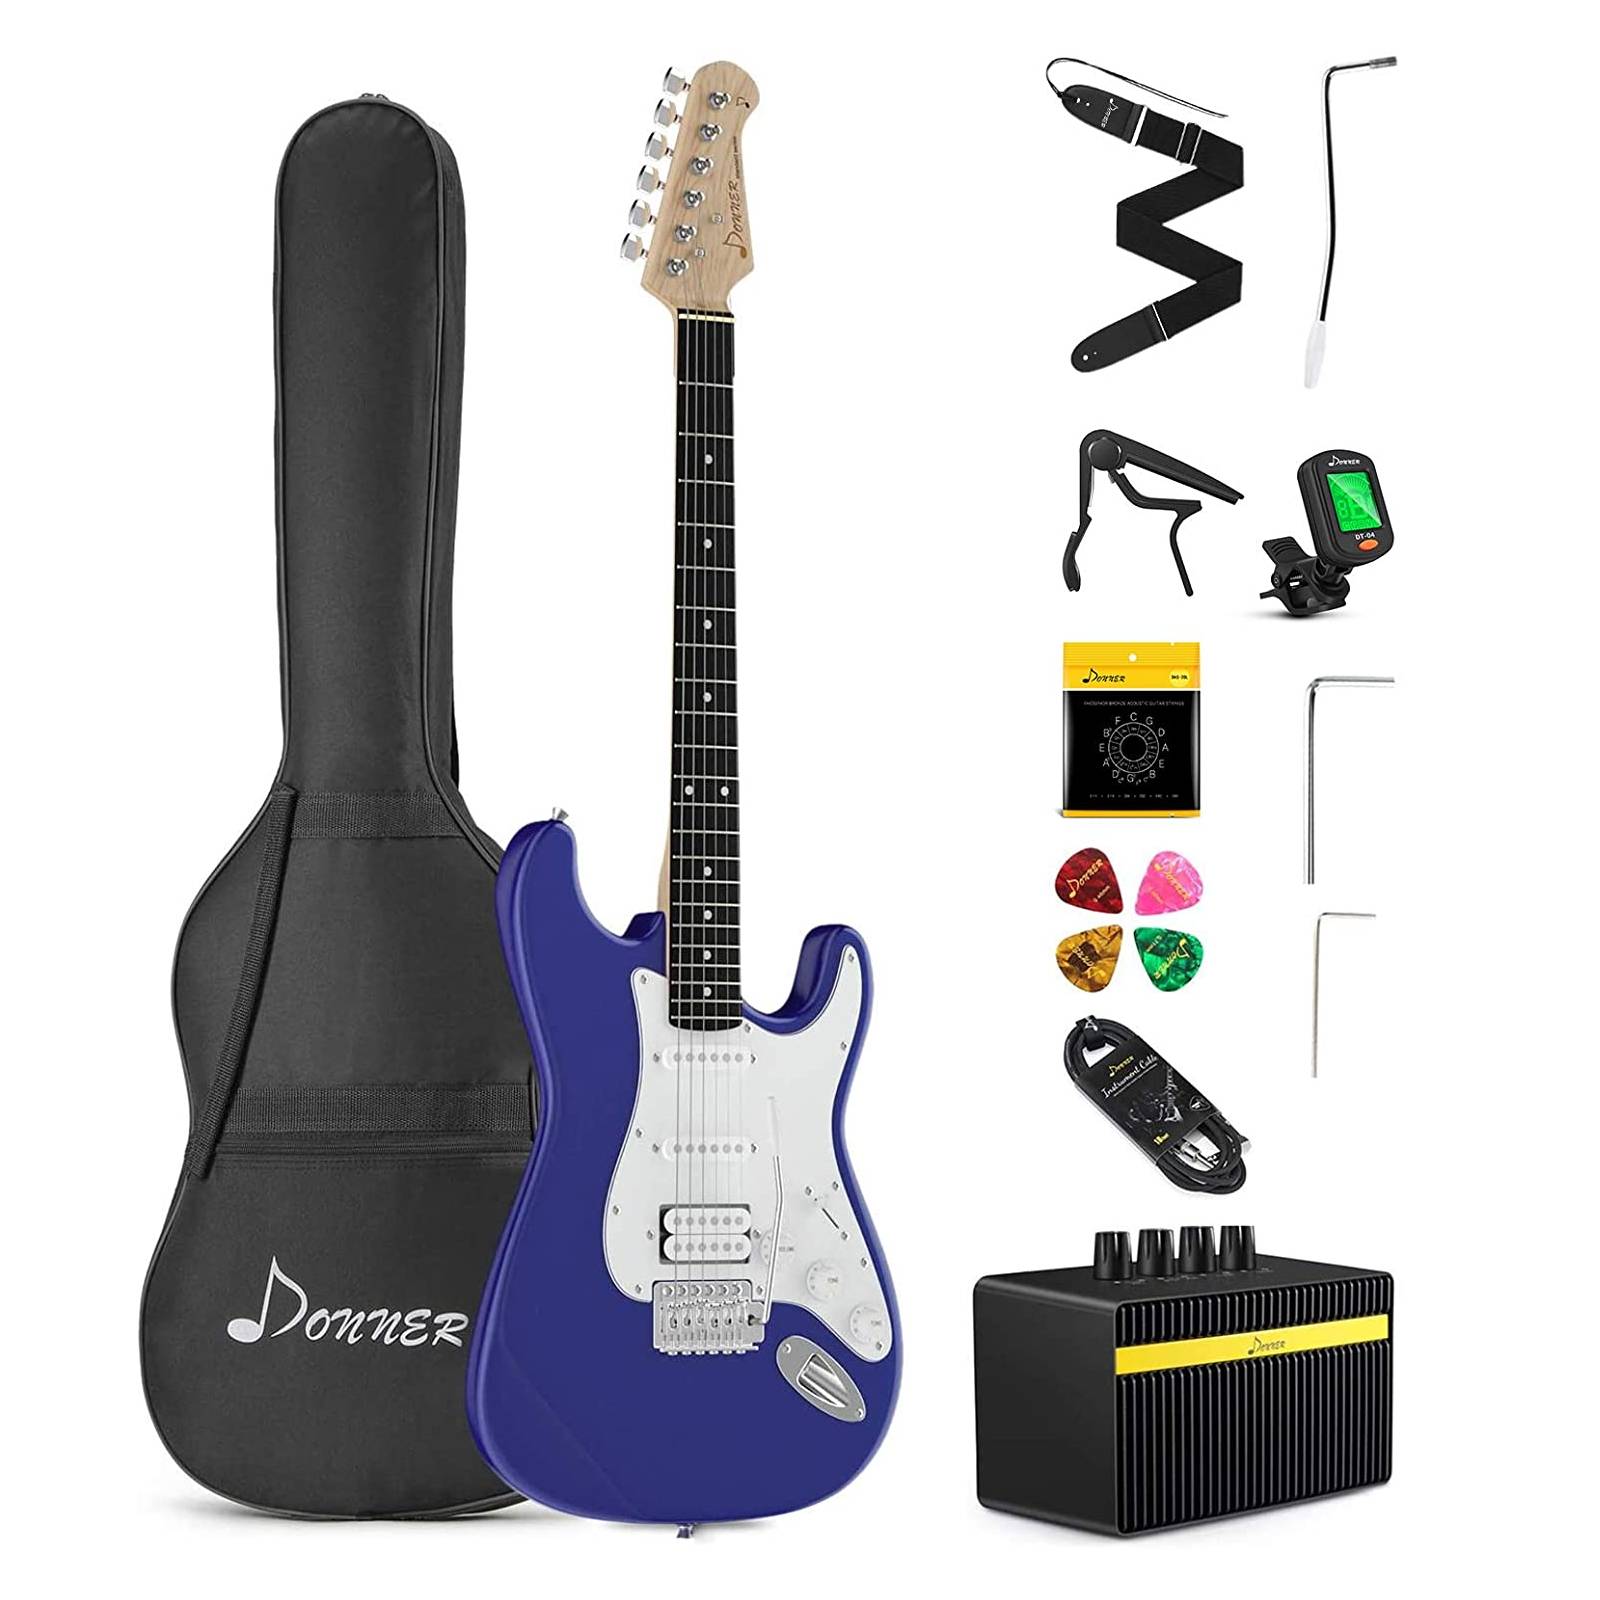 

Donner DST-102L 39 Inch Electric Guitar Beginner Kit Solid Body Purple Full Size Sapphire Blue HSS Pick Up for Starter, with Amplifier, Bag, Digital Tuner, Capo, Strap, String,Cable, Picks